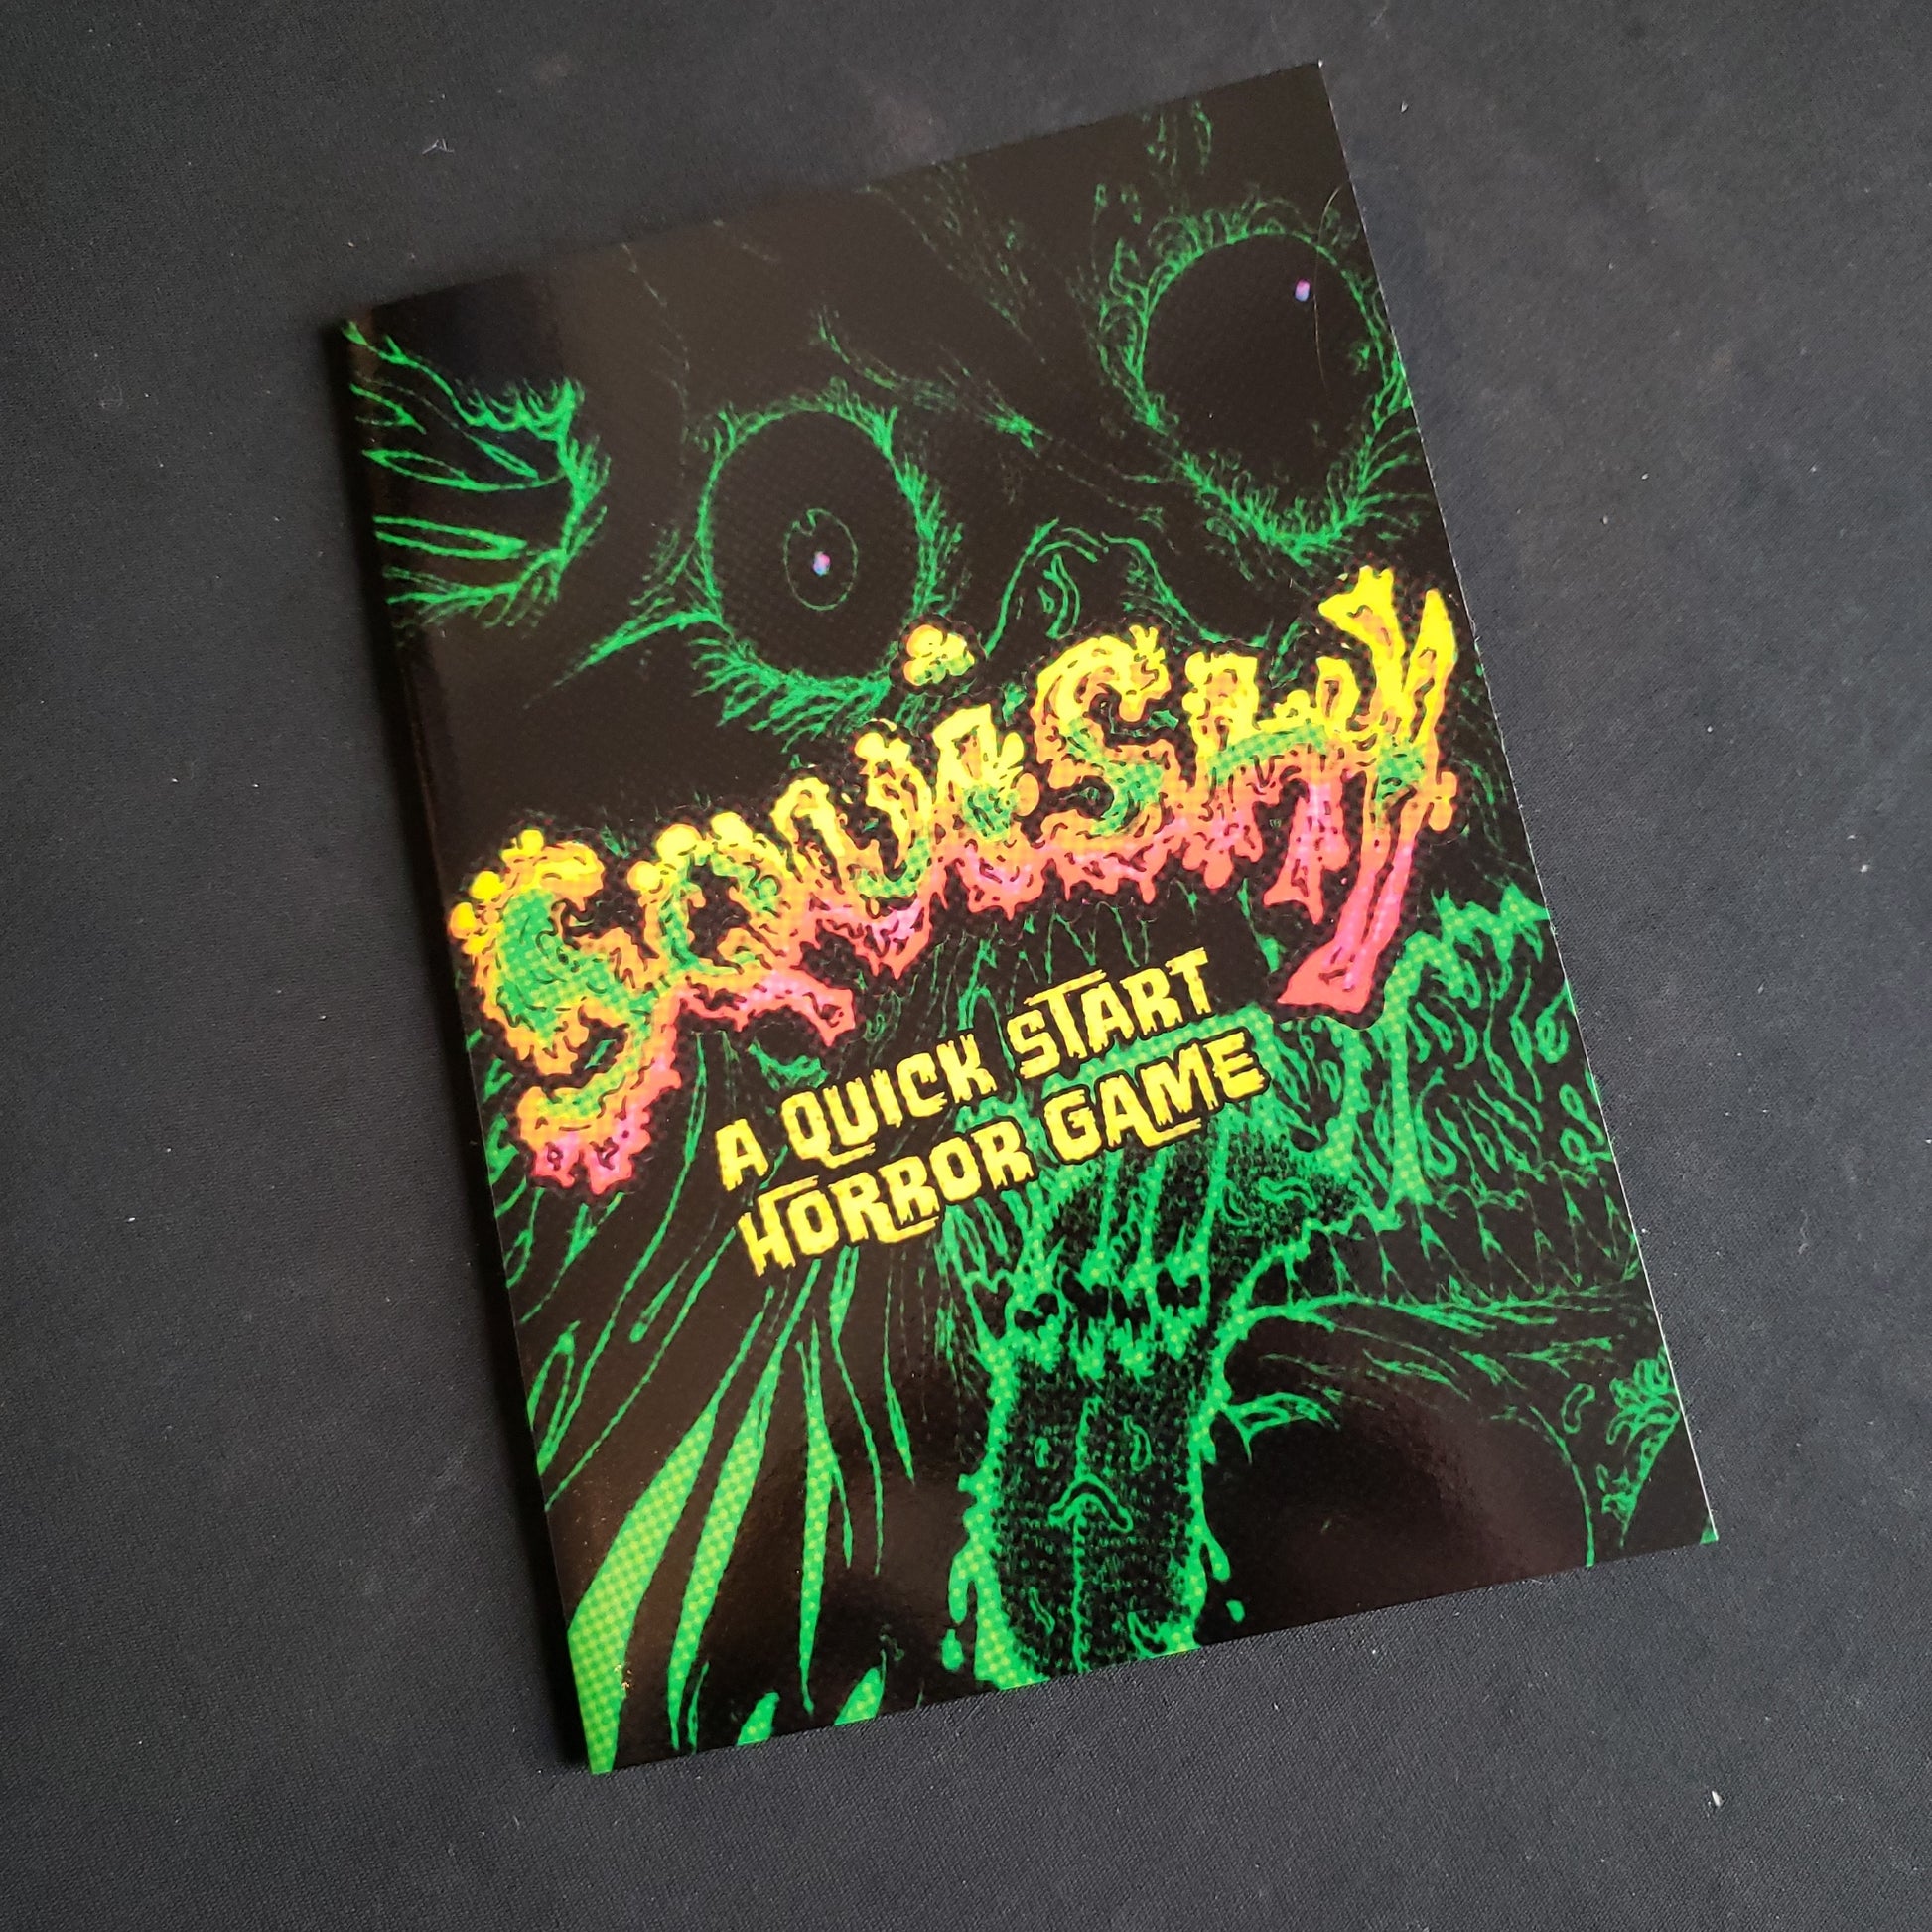 Image shows the front cover of the Squishy roleplaying game book